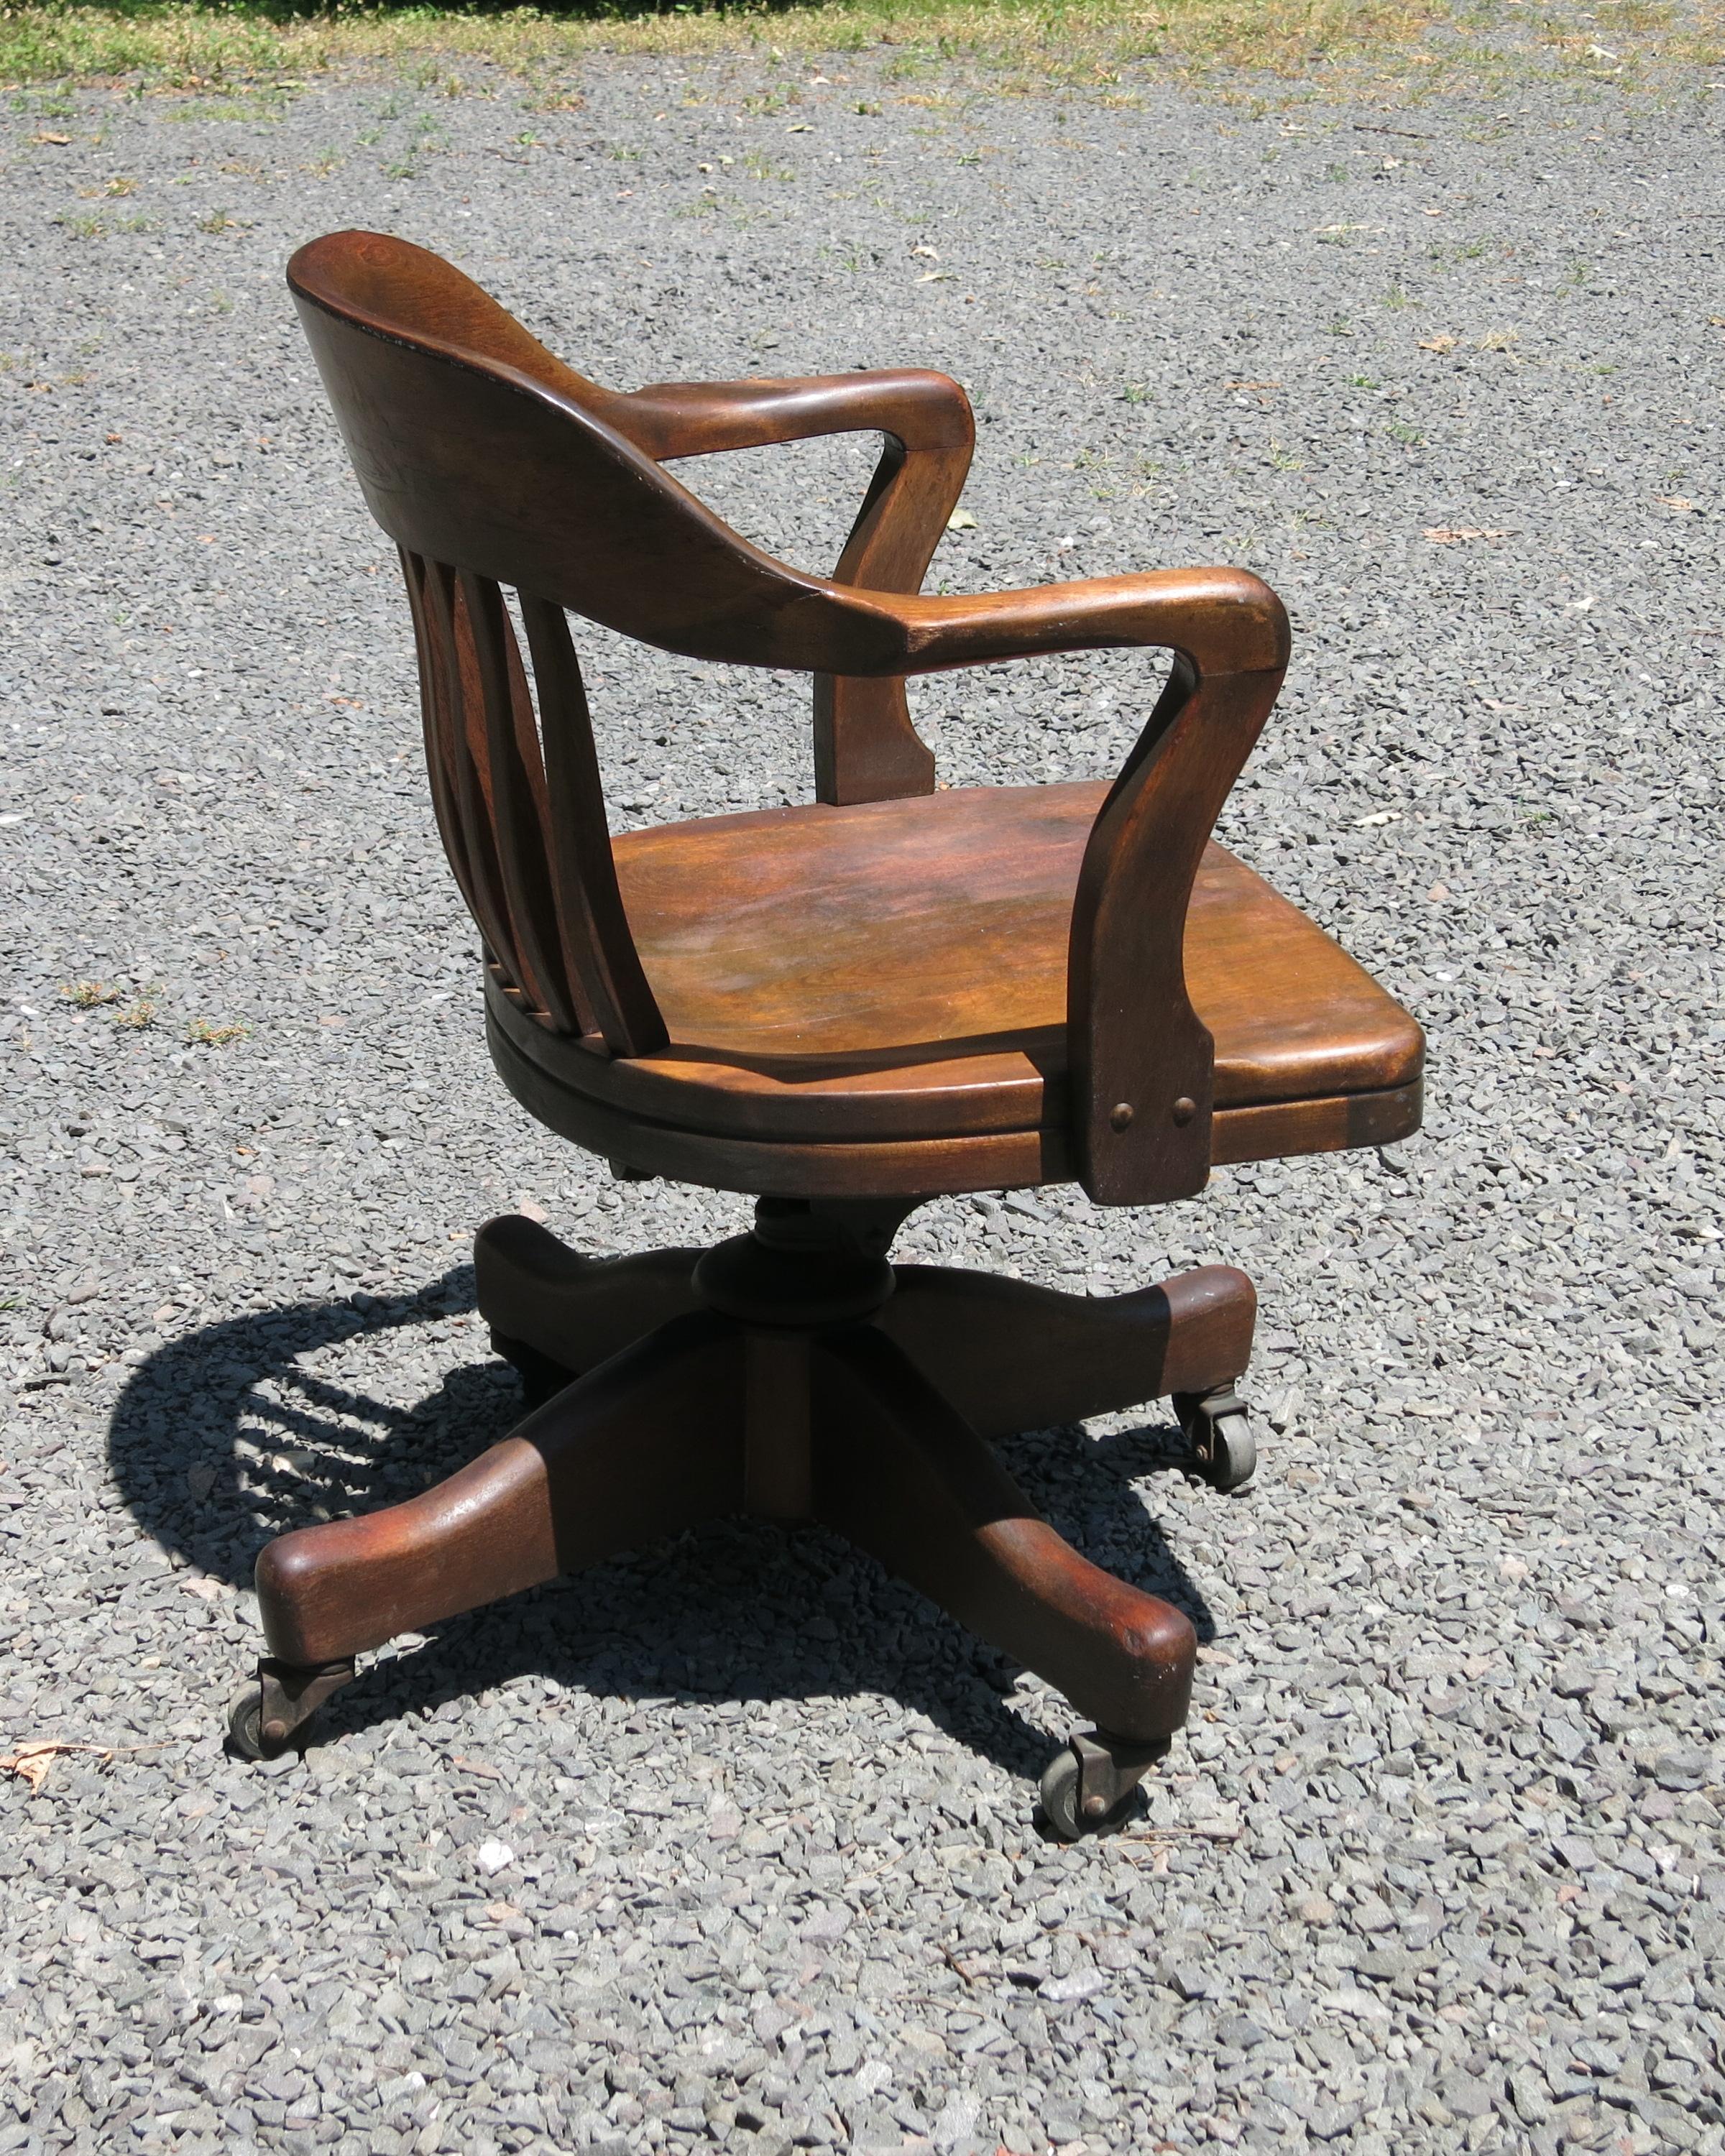 Bankers swivel chair adjustable and on wheels. Worn finish with warm patina. Some scratches and chips. Adjustable for tilt and height. It is 24.5